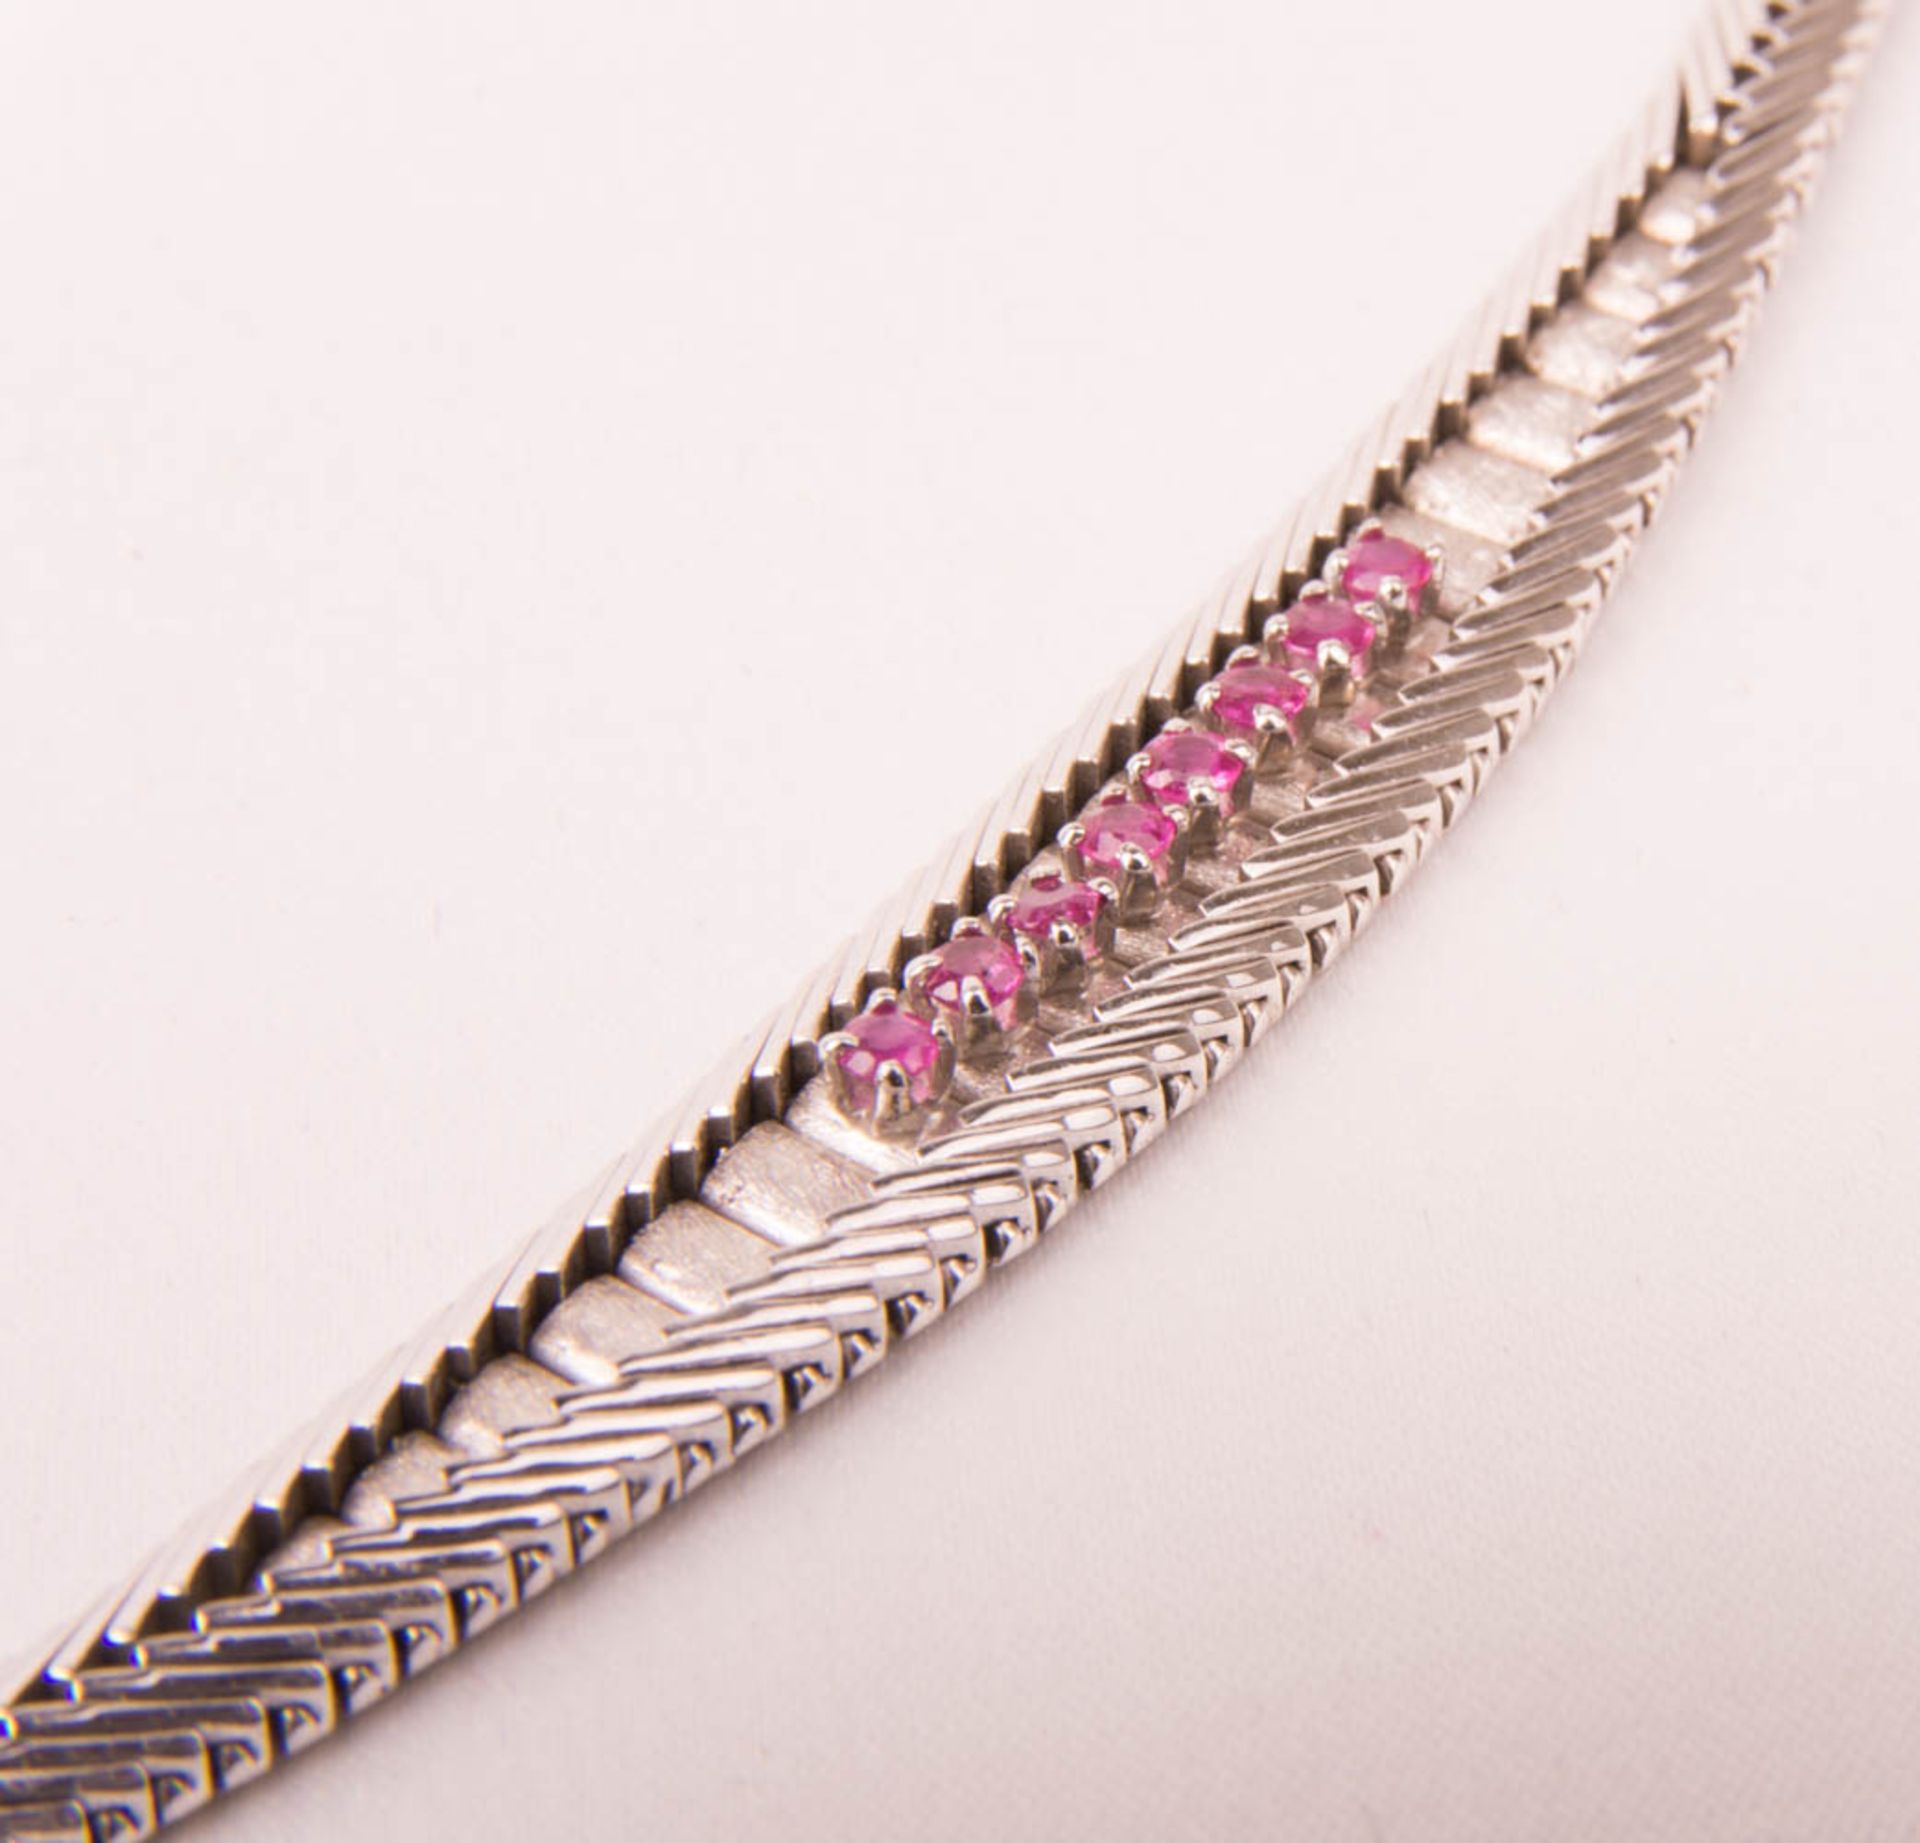 Bracelet with eight pink sapphires, 750 white gold hallmarked, sub-alloyed! - Image 2 of 3